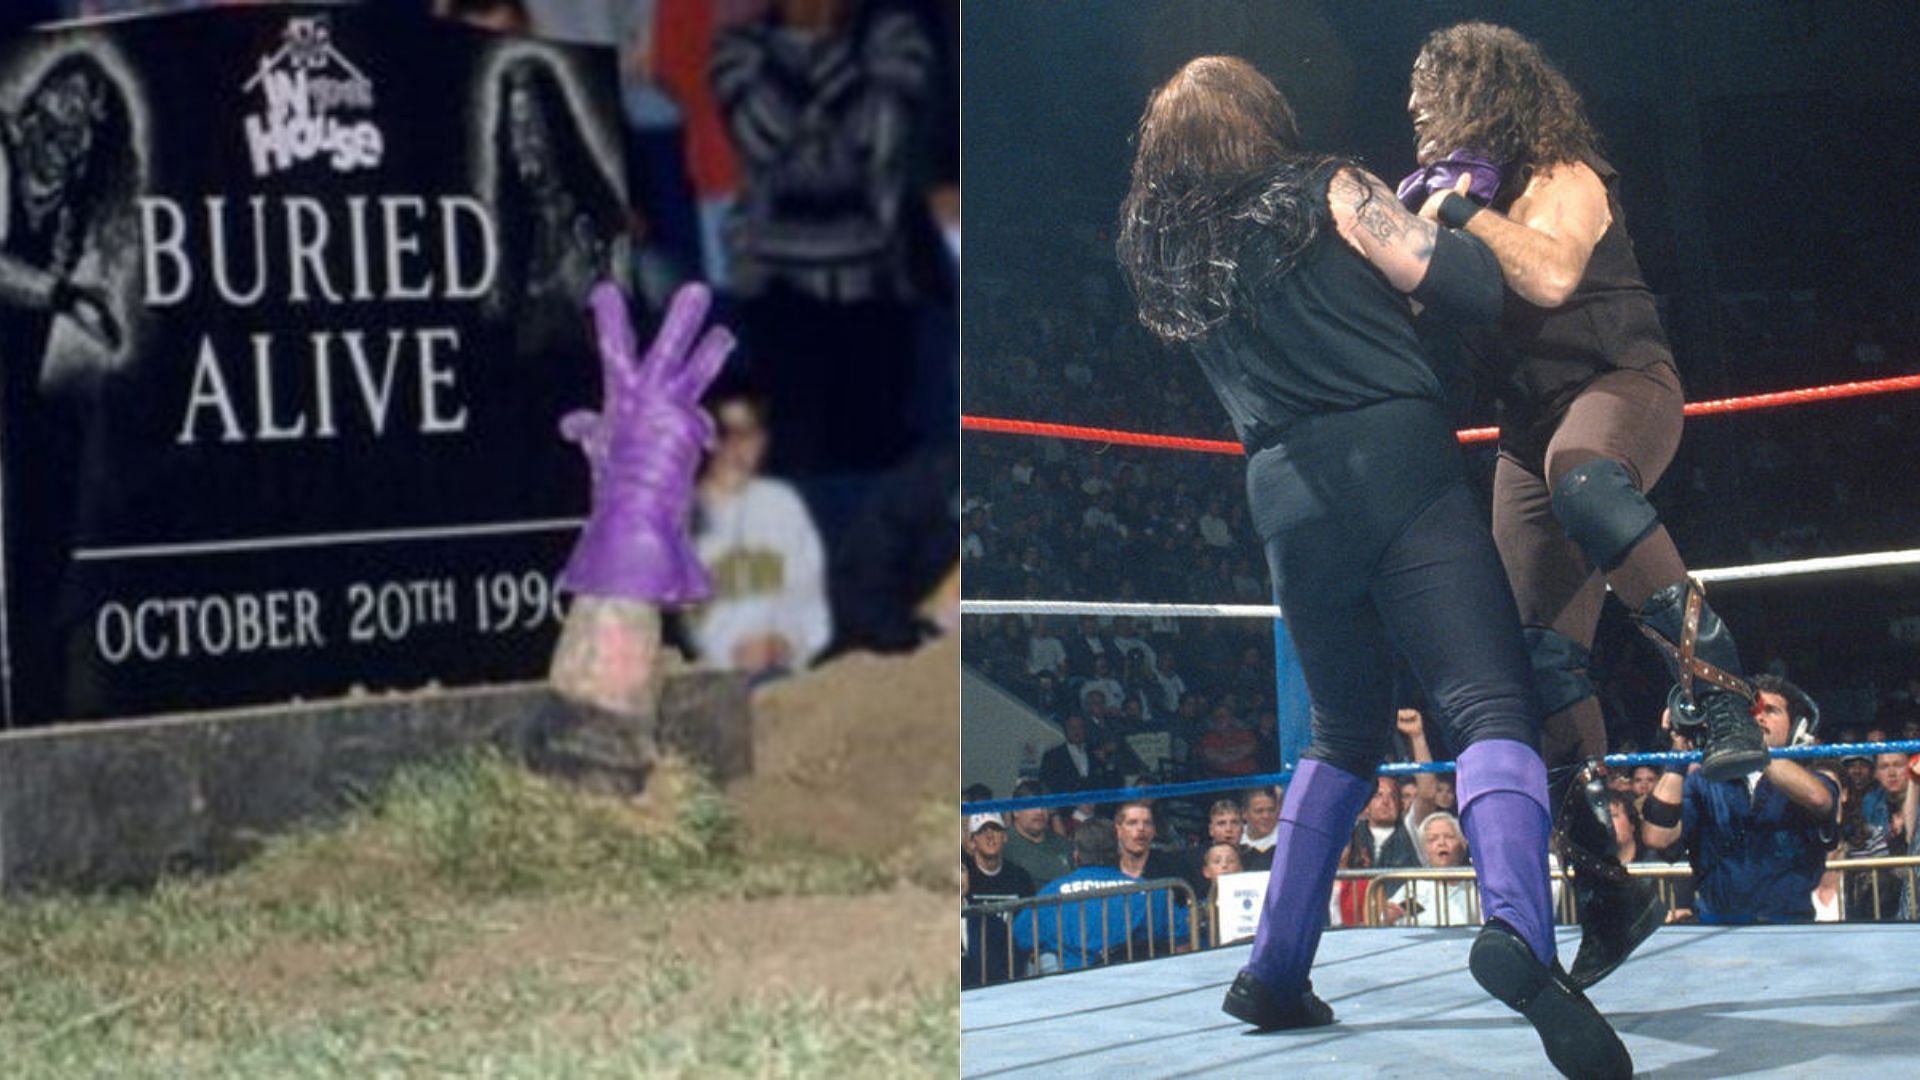 Mick Foley, aka Mankind, feuded with The Undertaker in the 1990s.